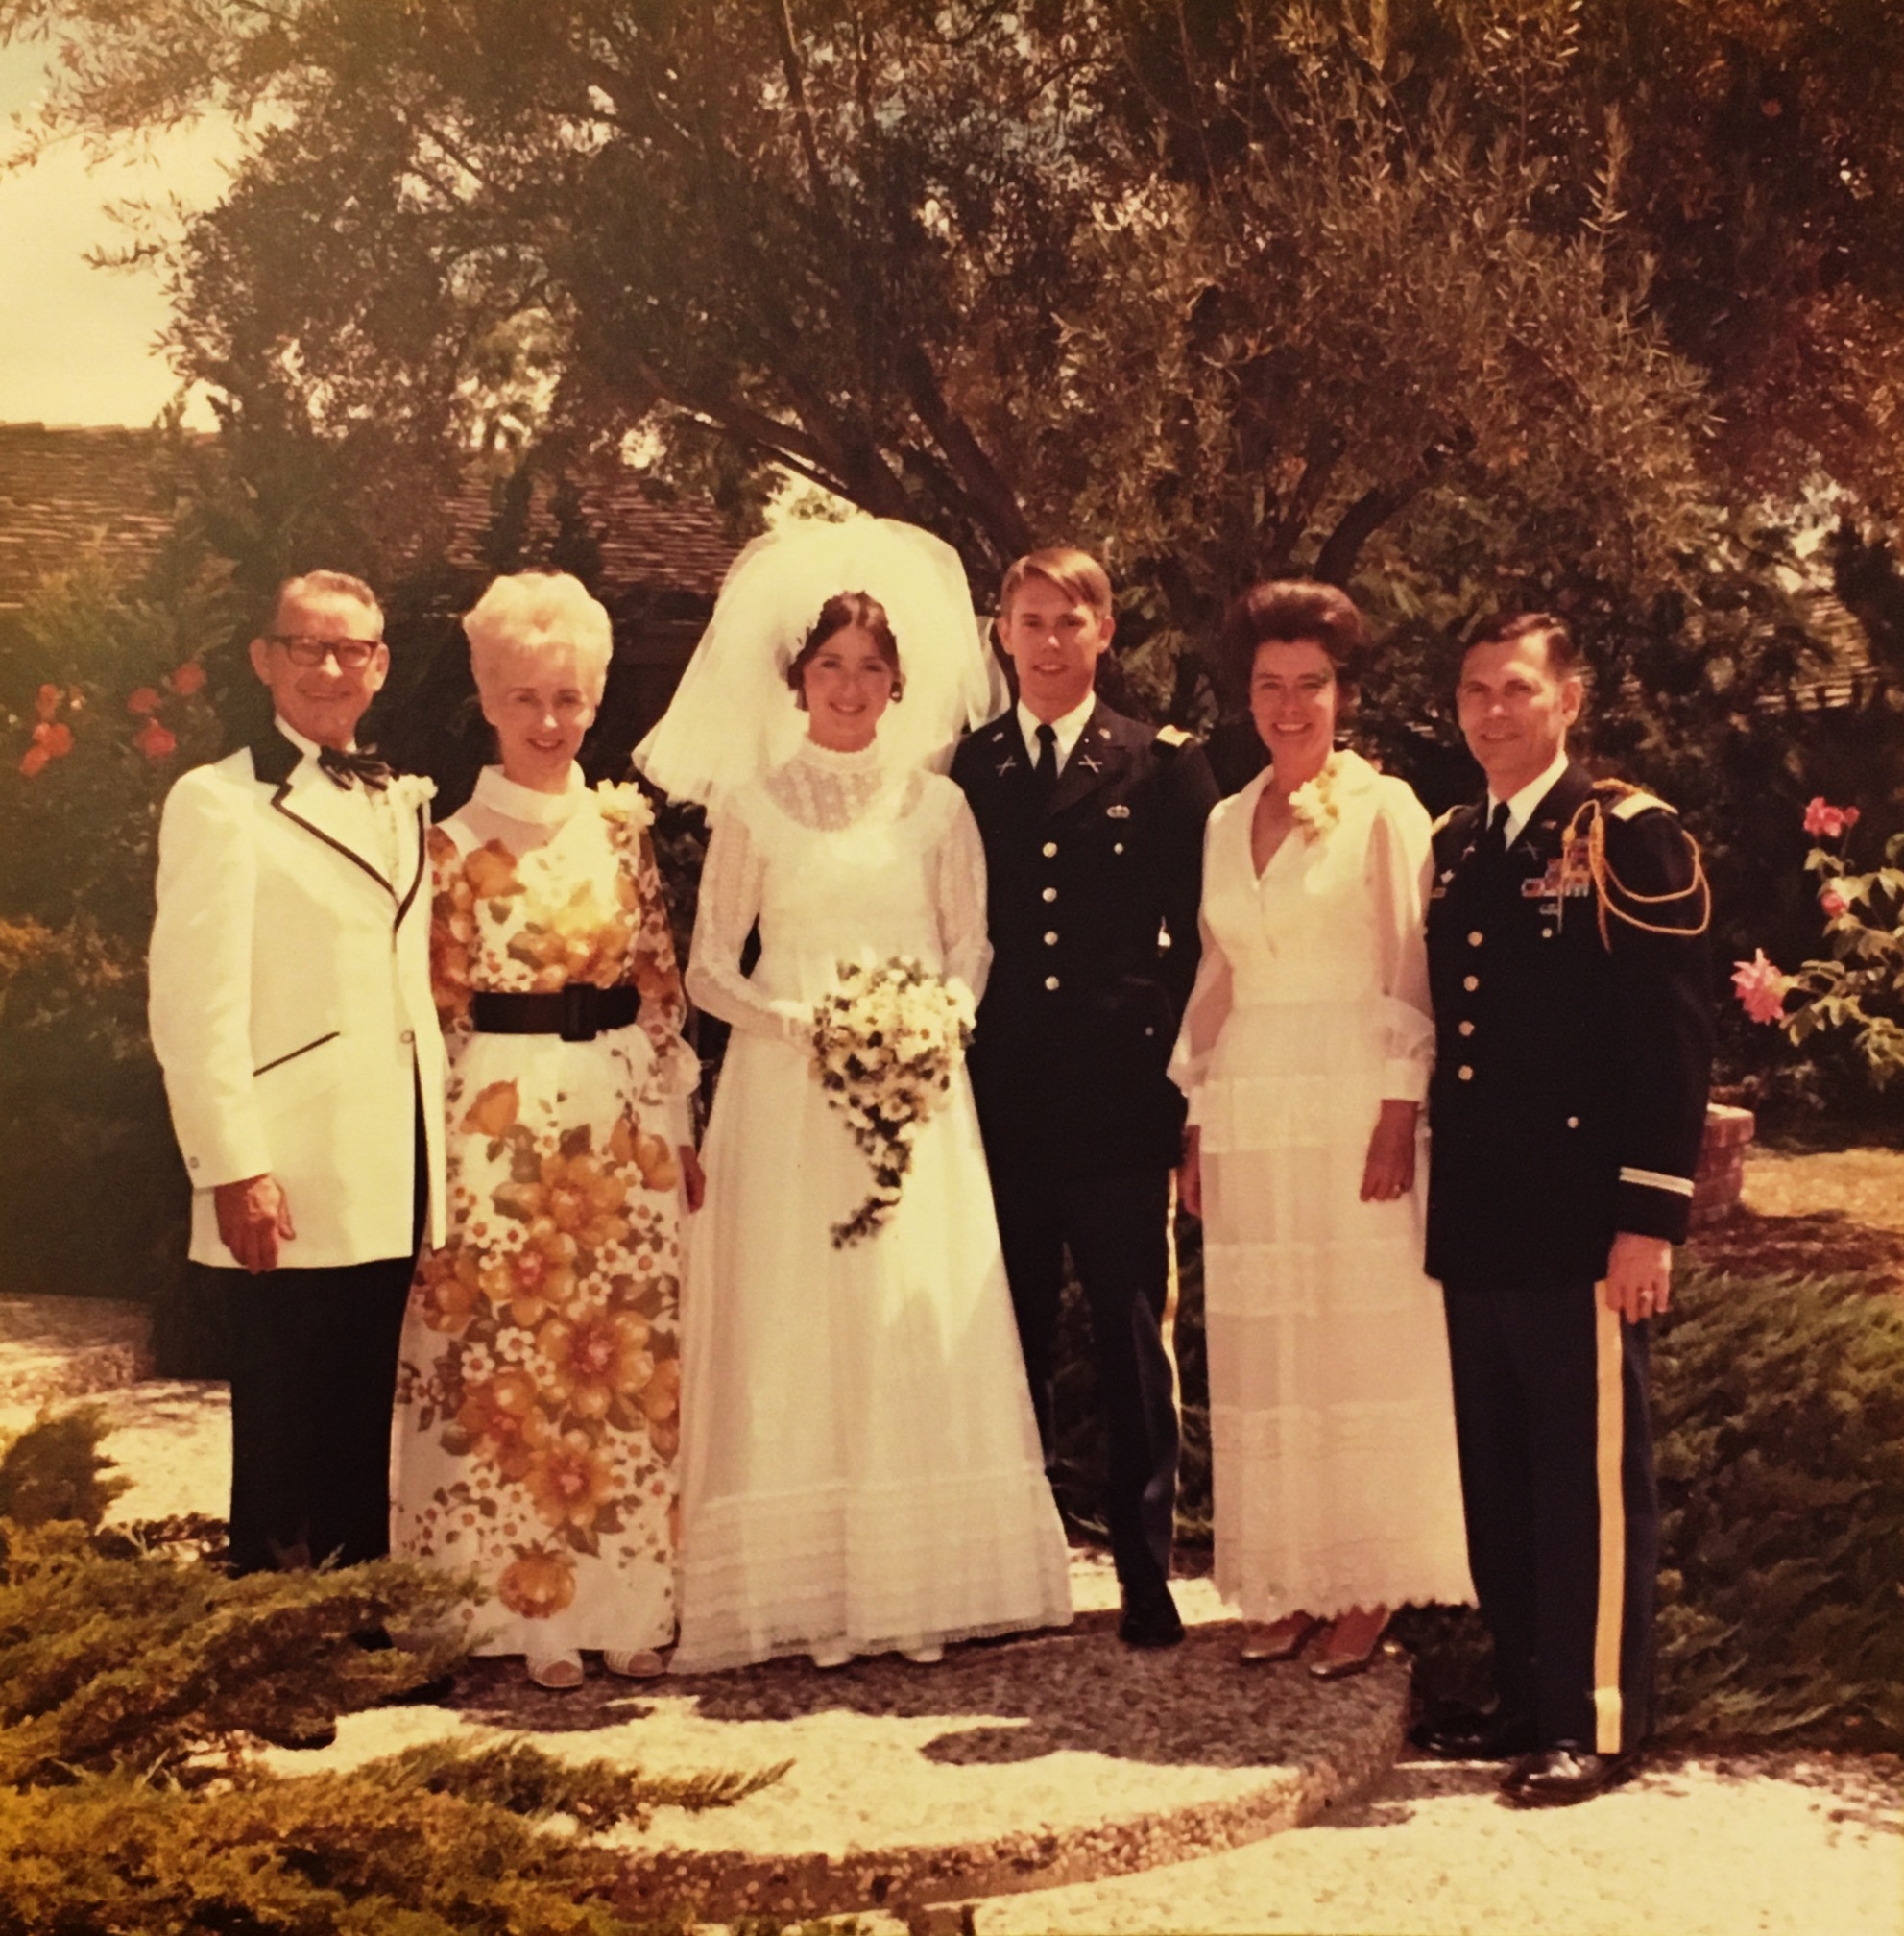 Our wedding day, June 16, 1973.